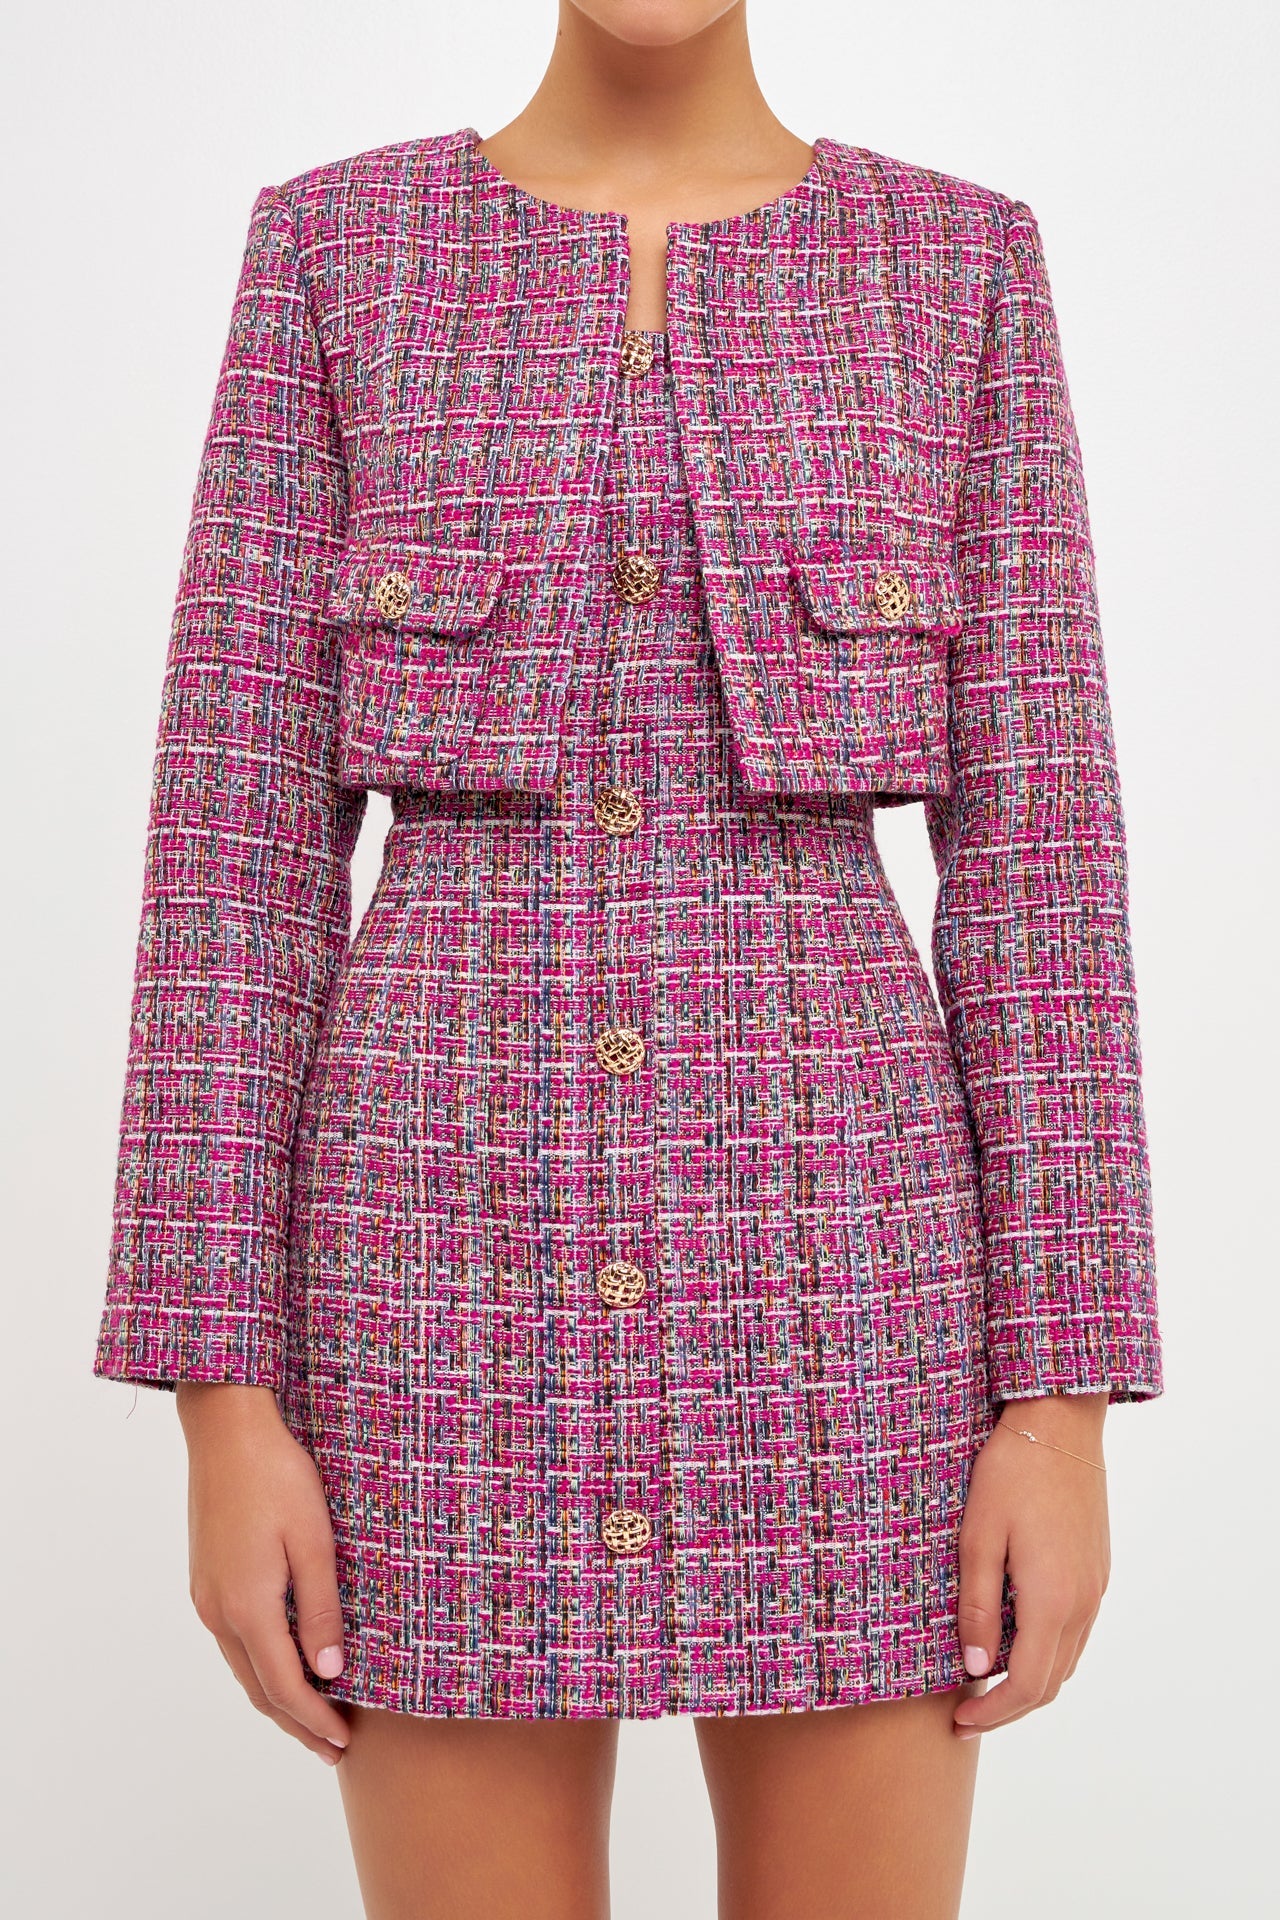 Endless Rose - Cropped Tweed Jacket - Jackets in Women's Clothing available at endlessrose.com